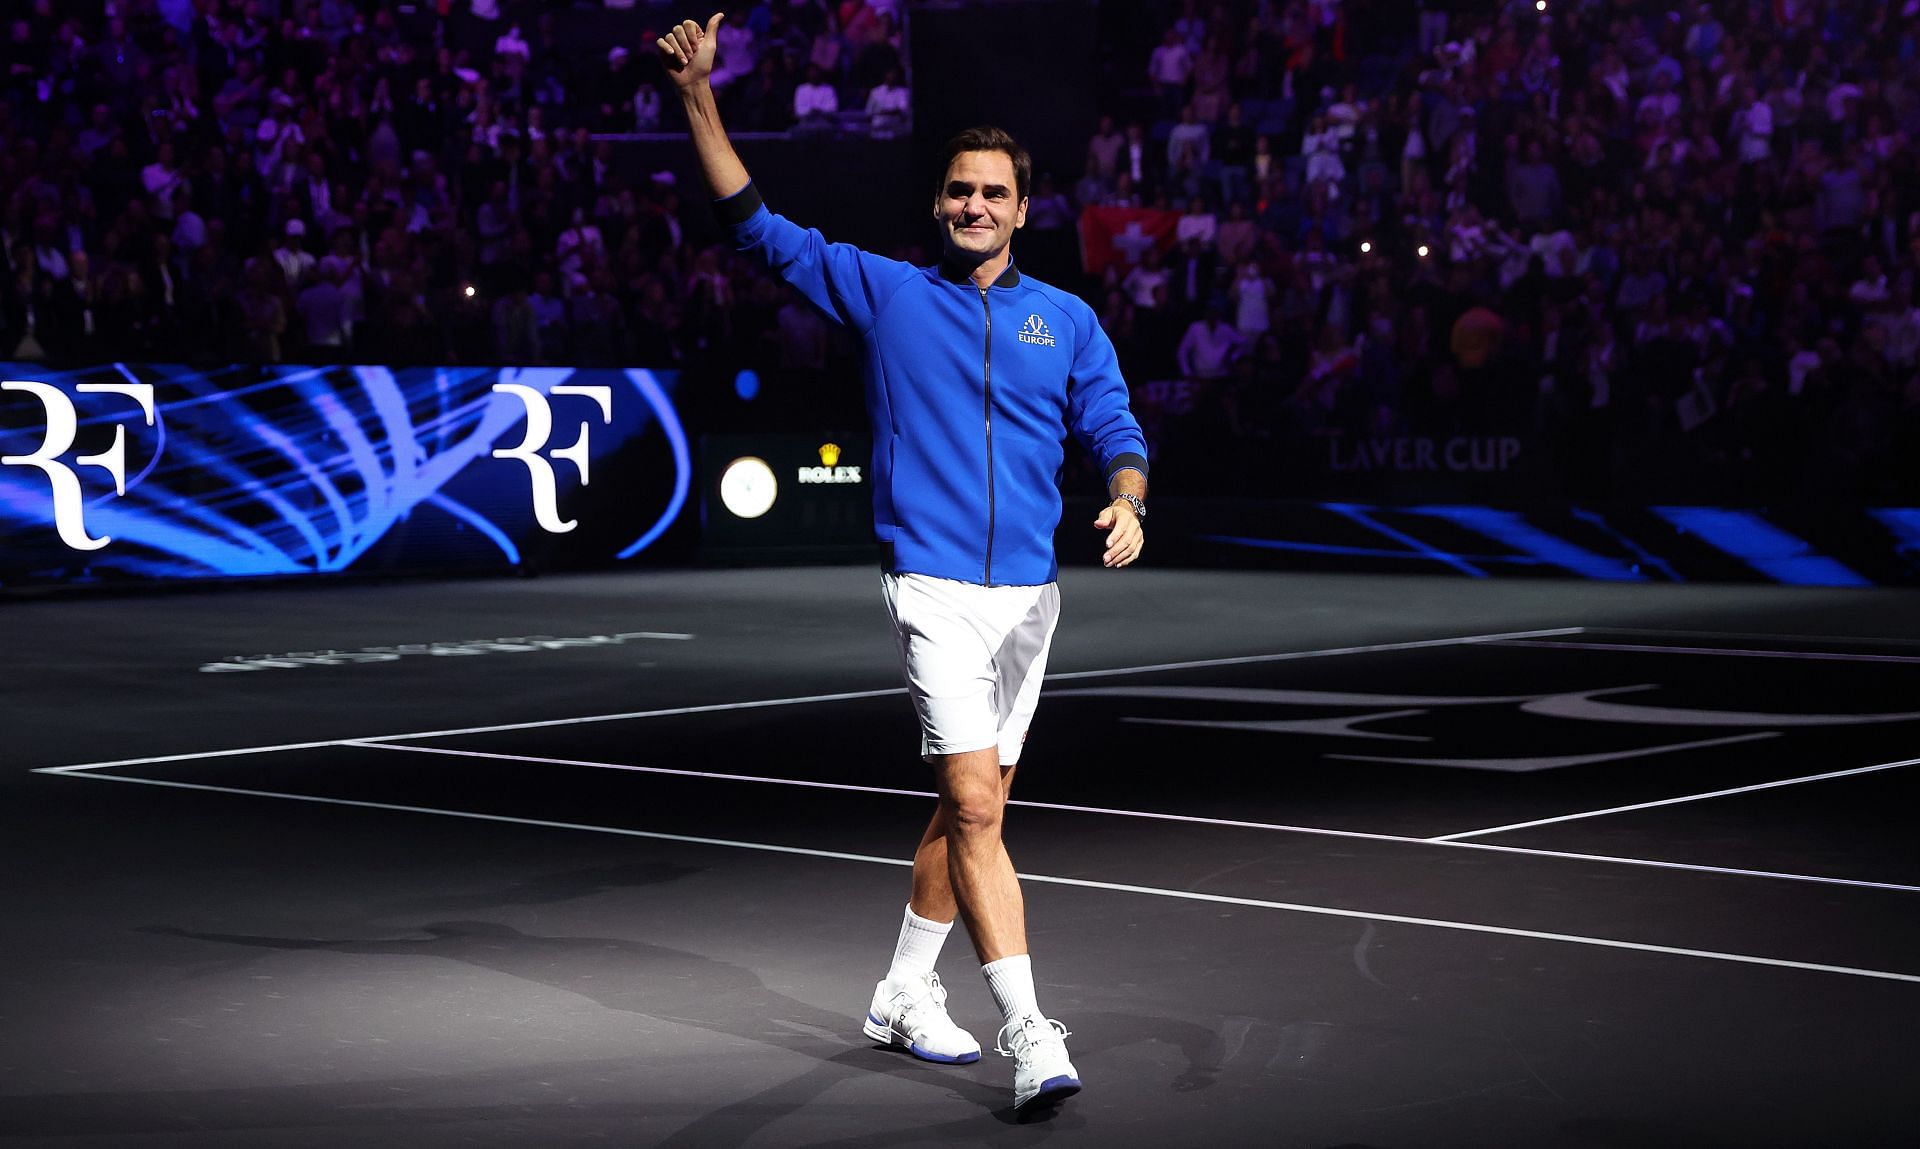 Roger Federer pictured at the Laver Cup 2022 - Day One.